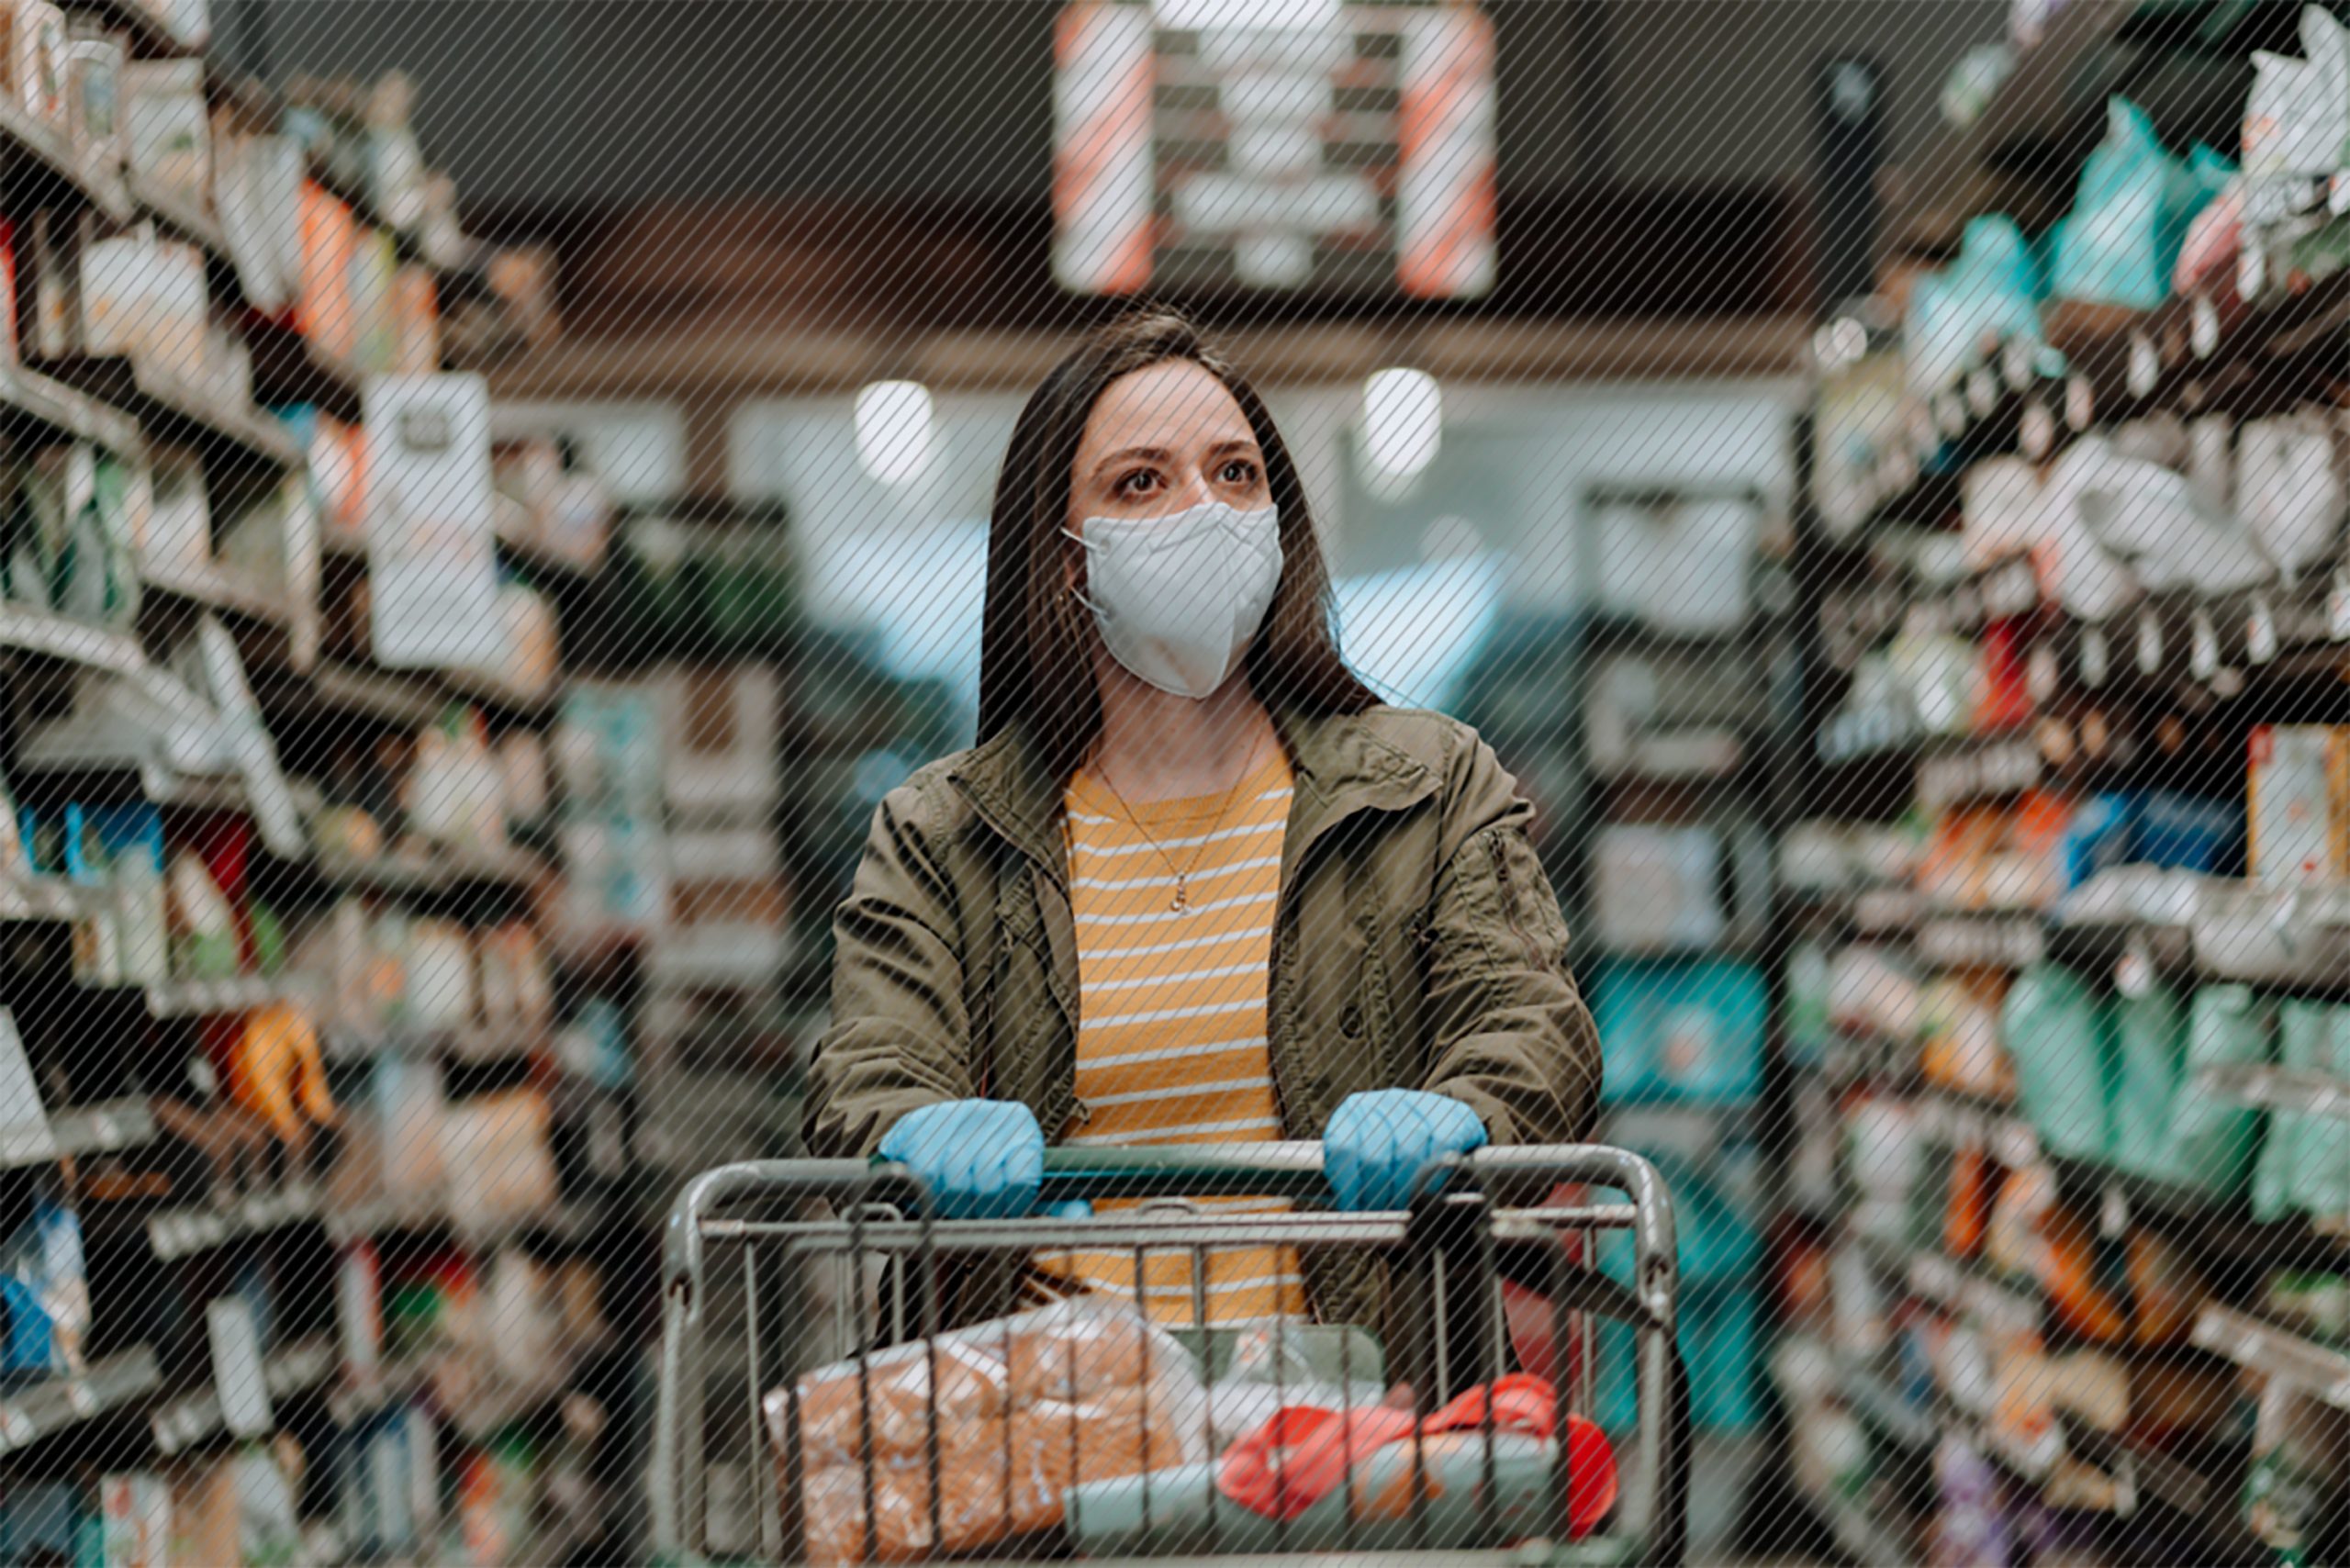 Woman wearing a face mask and gloves pushing her cart down a grocery isle